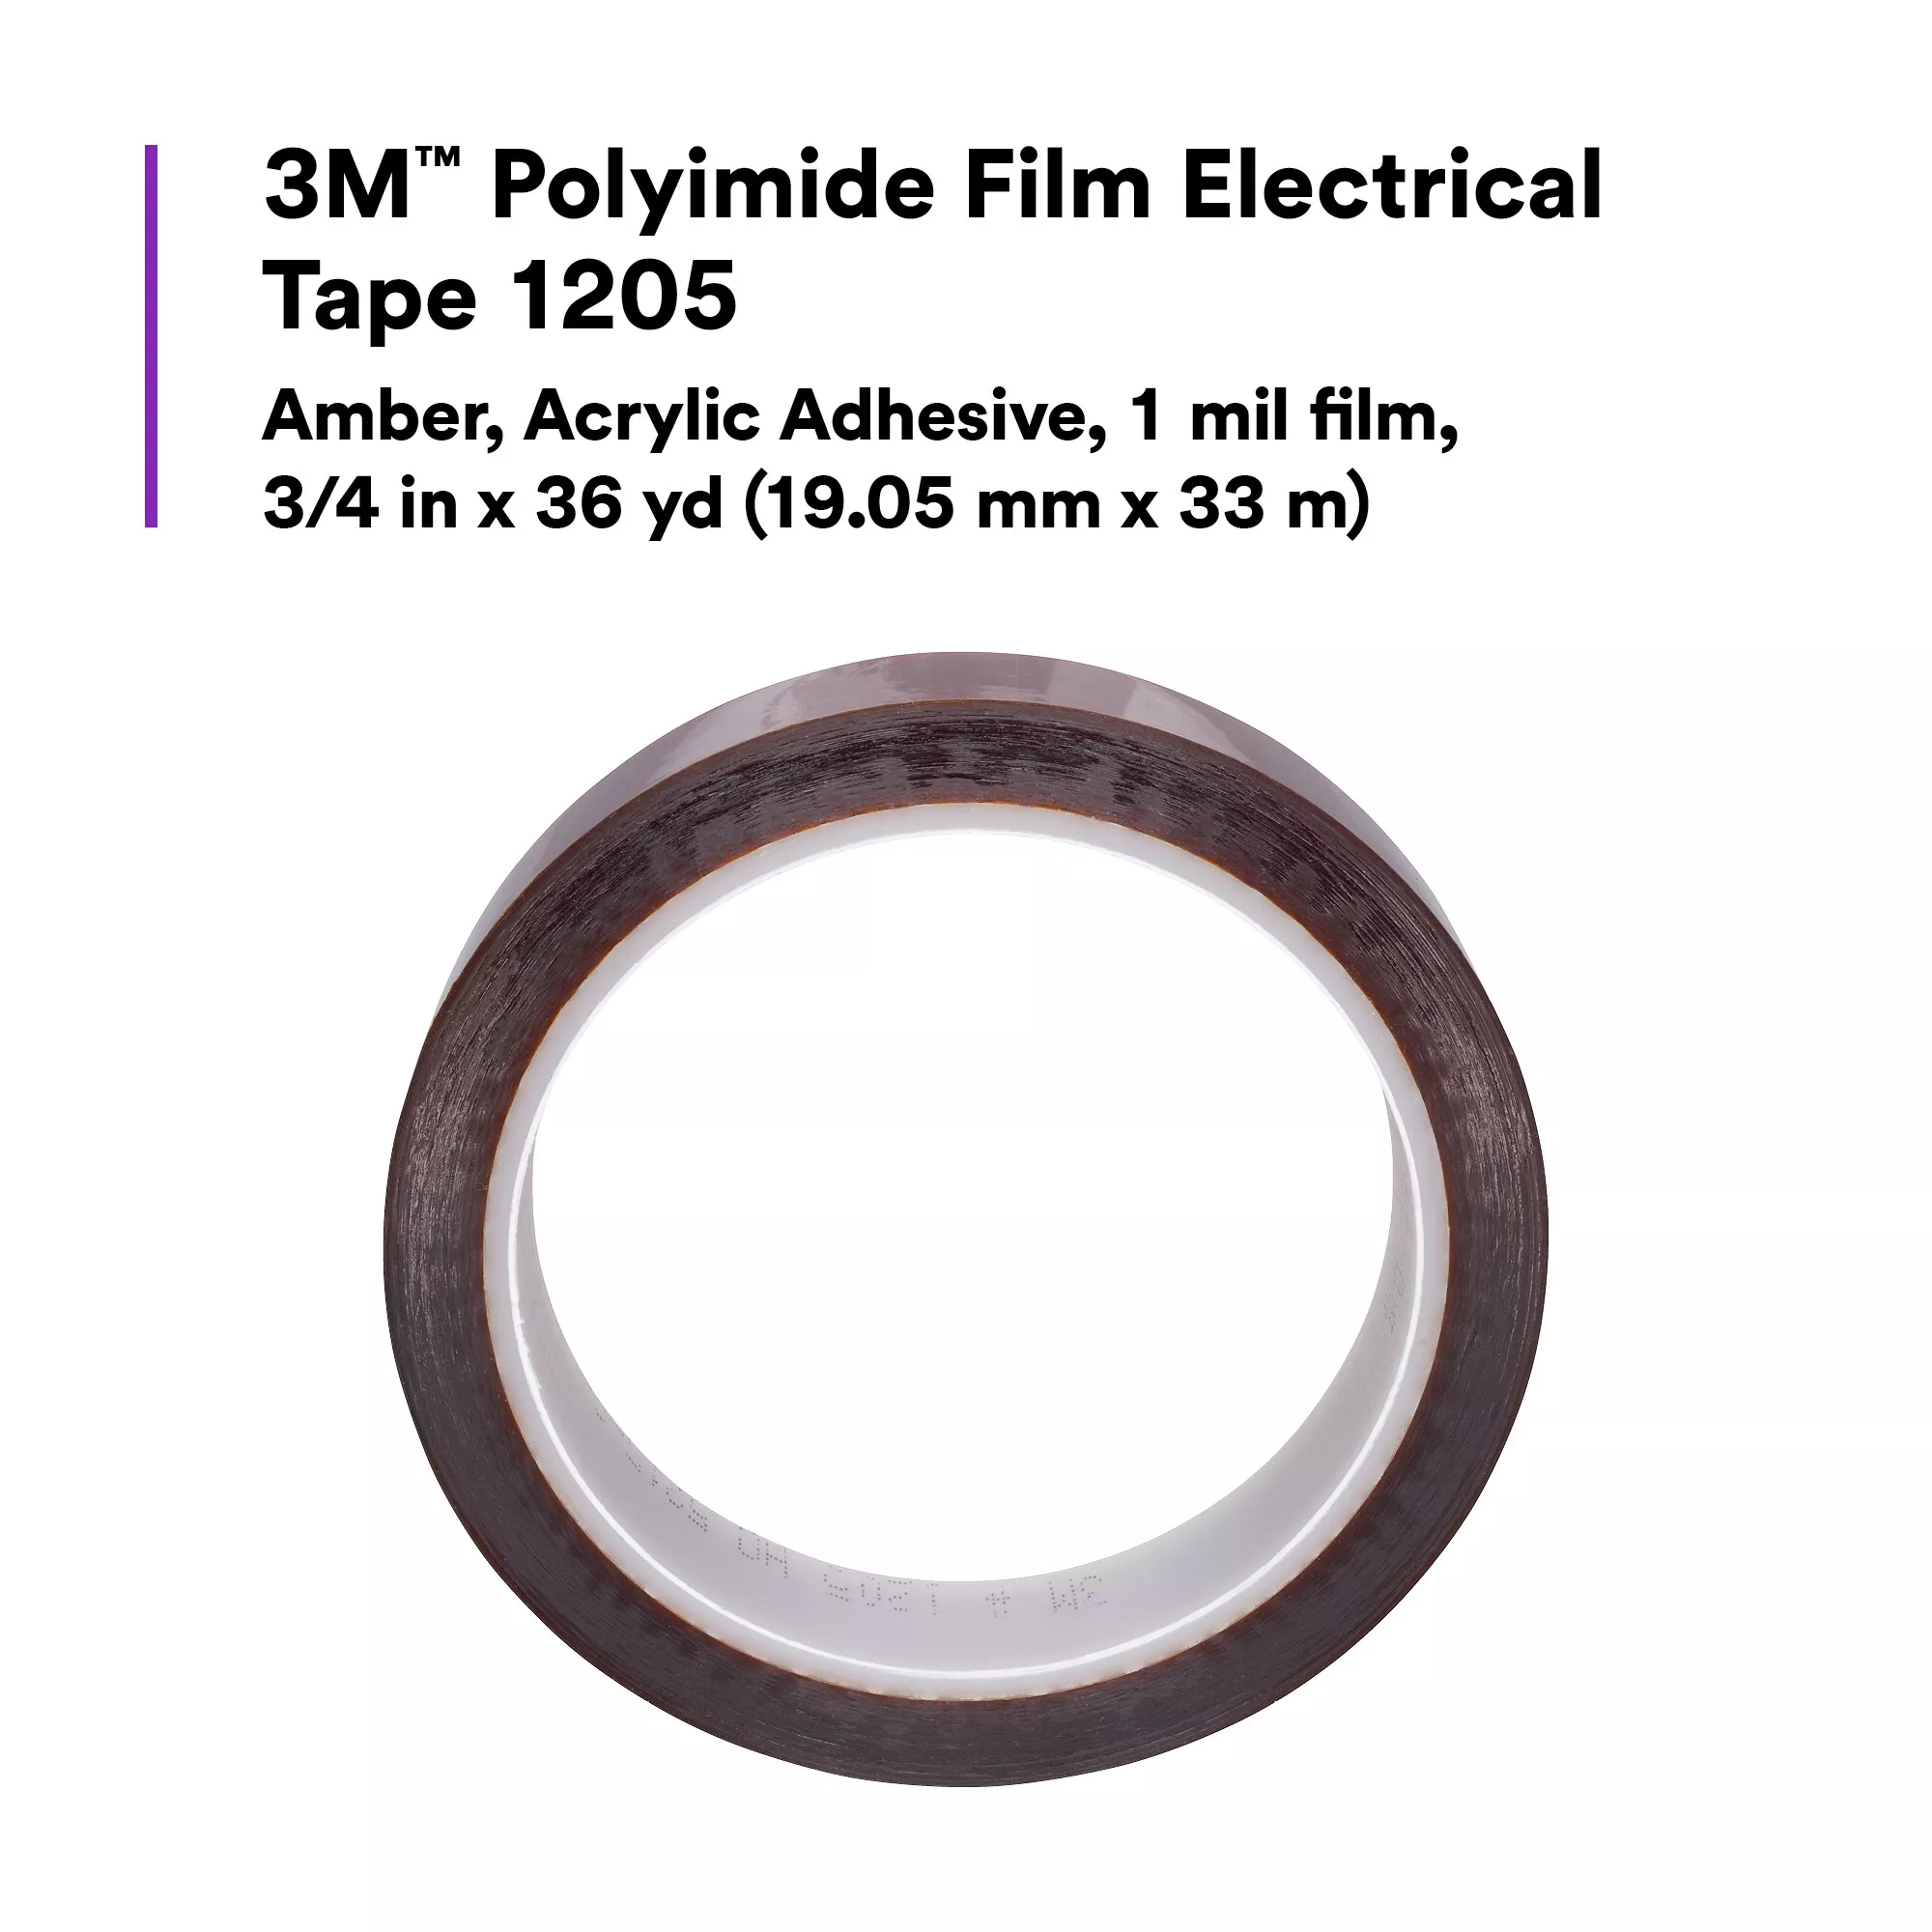 SKU 7100035654 | 3M™ Polyimide Film Electrical Tape 1205